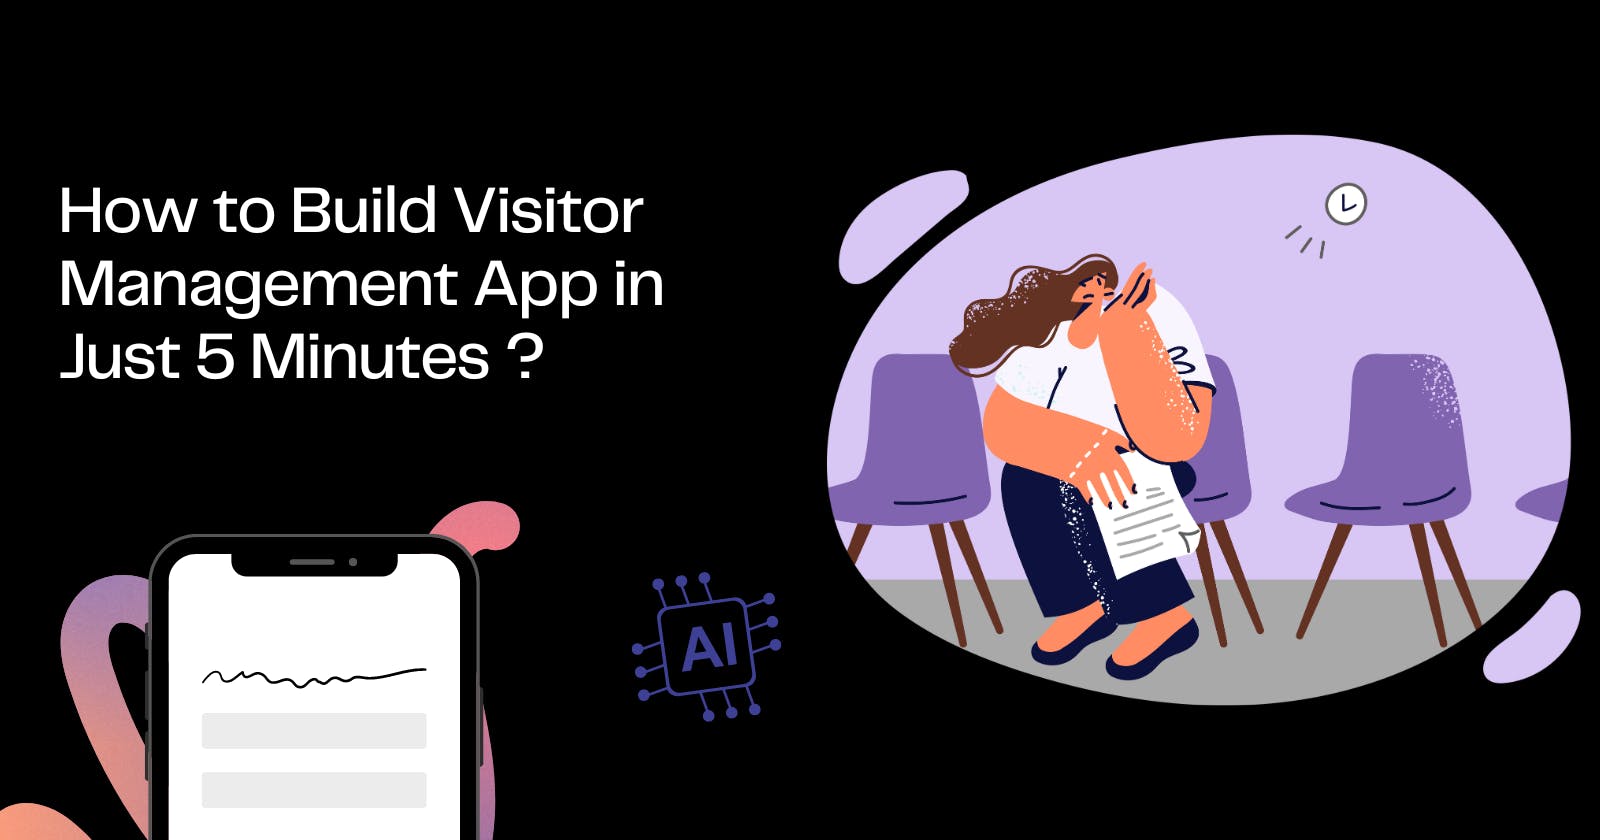 Free Visitor Management App in 5 Minutes? Yes, It's Possible(Powerful) with Clappia's AI.